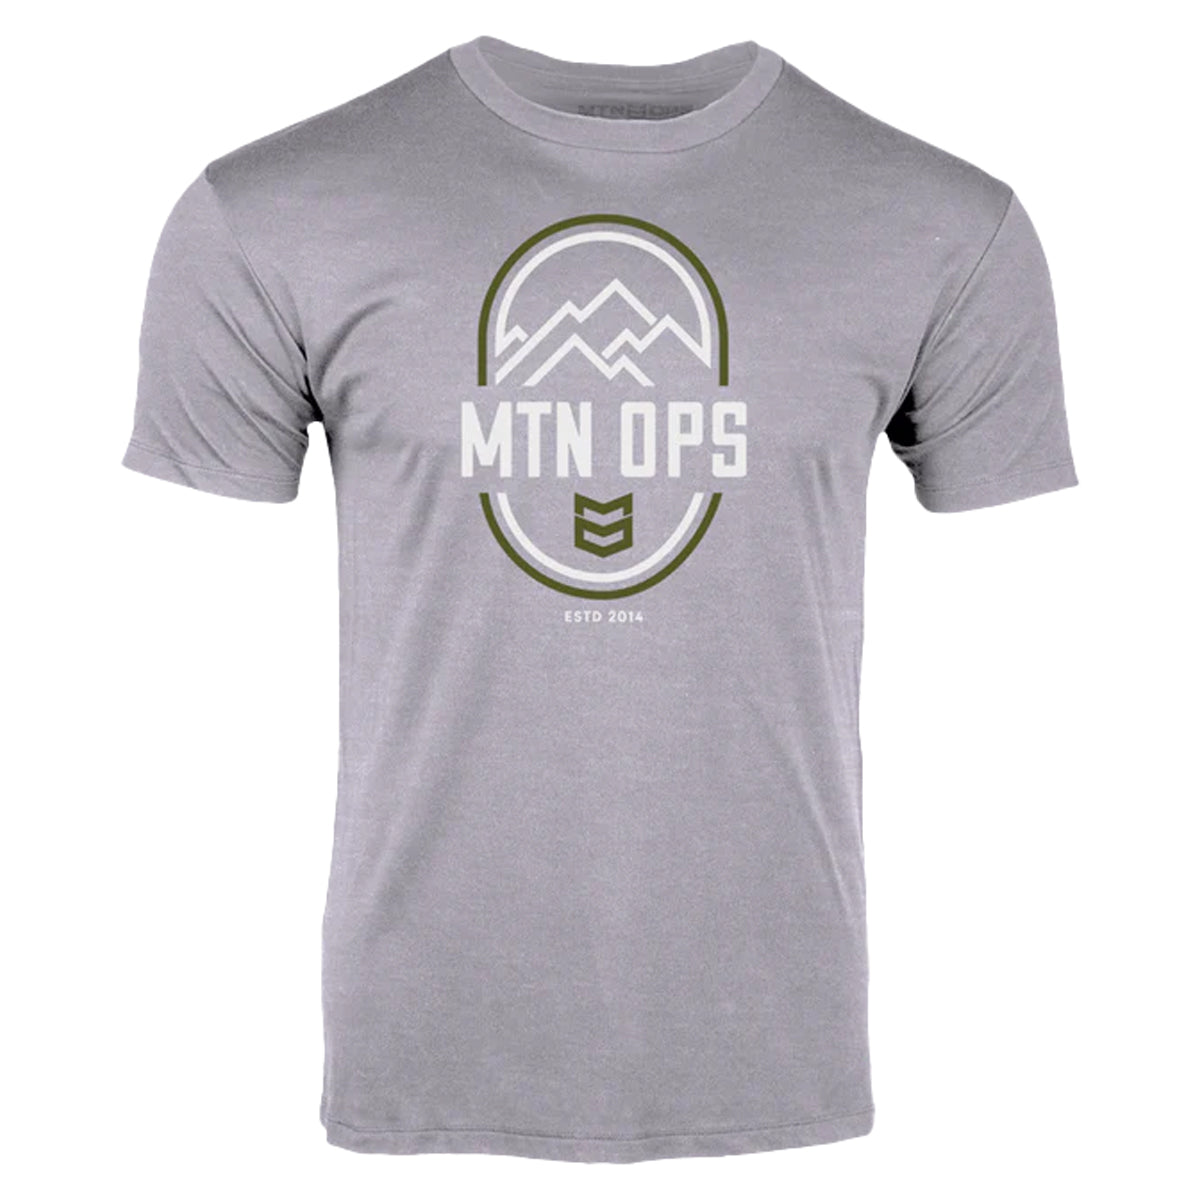 MTN OPS Scoped Tee in Heather Gray by GOHUNT | Mtn Ops - GOHUNT Shop